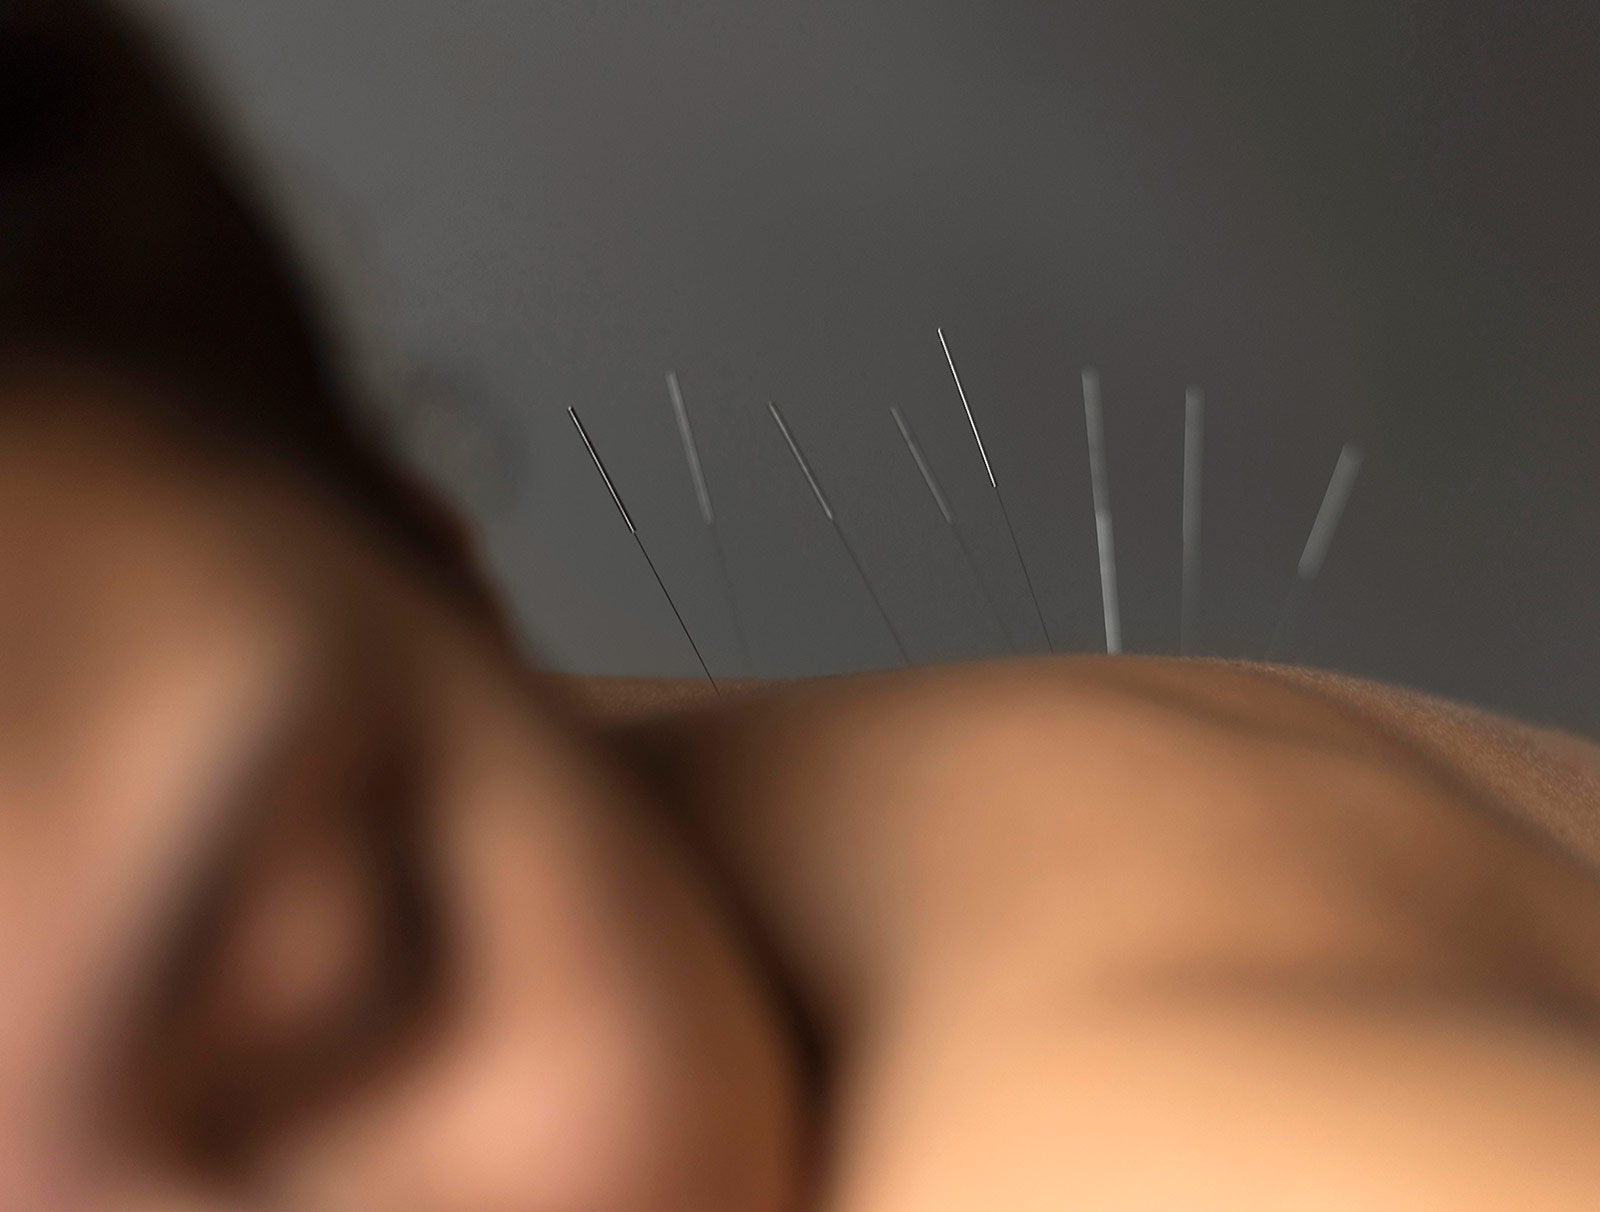 Woman receiving acupuncture on the back, zoomed in